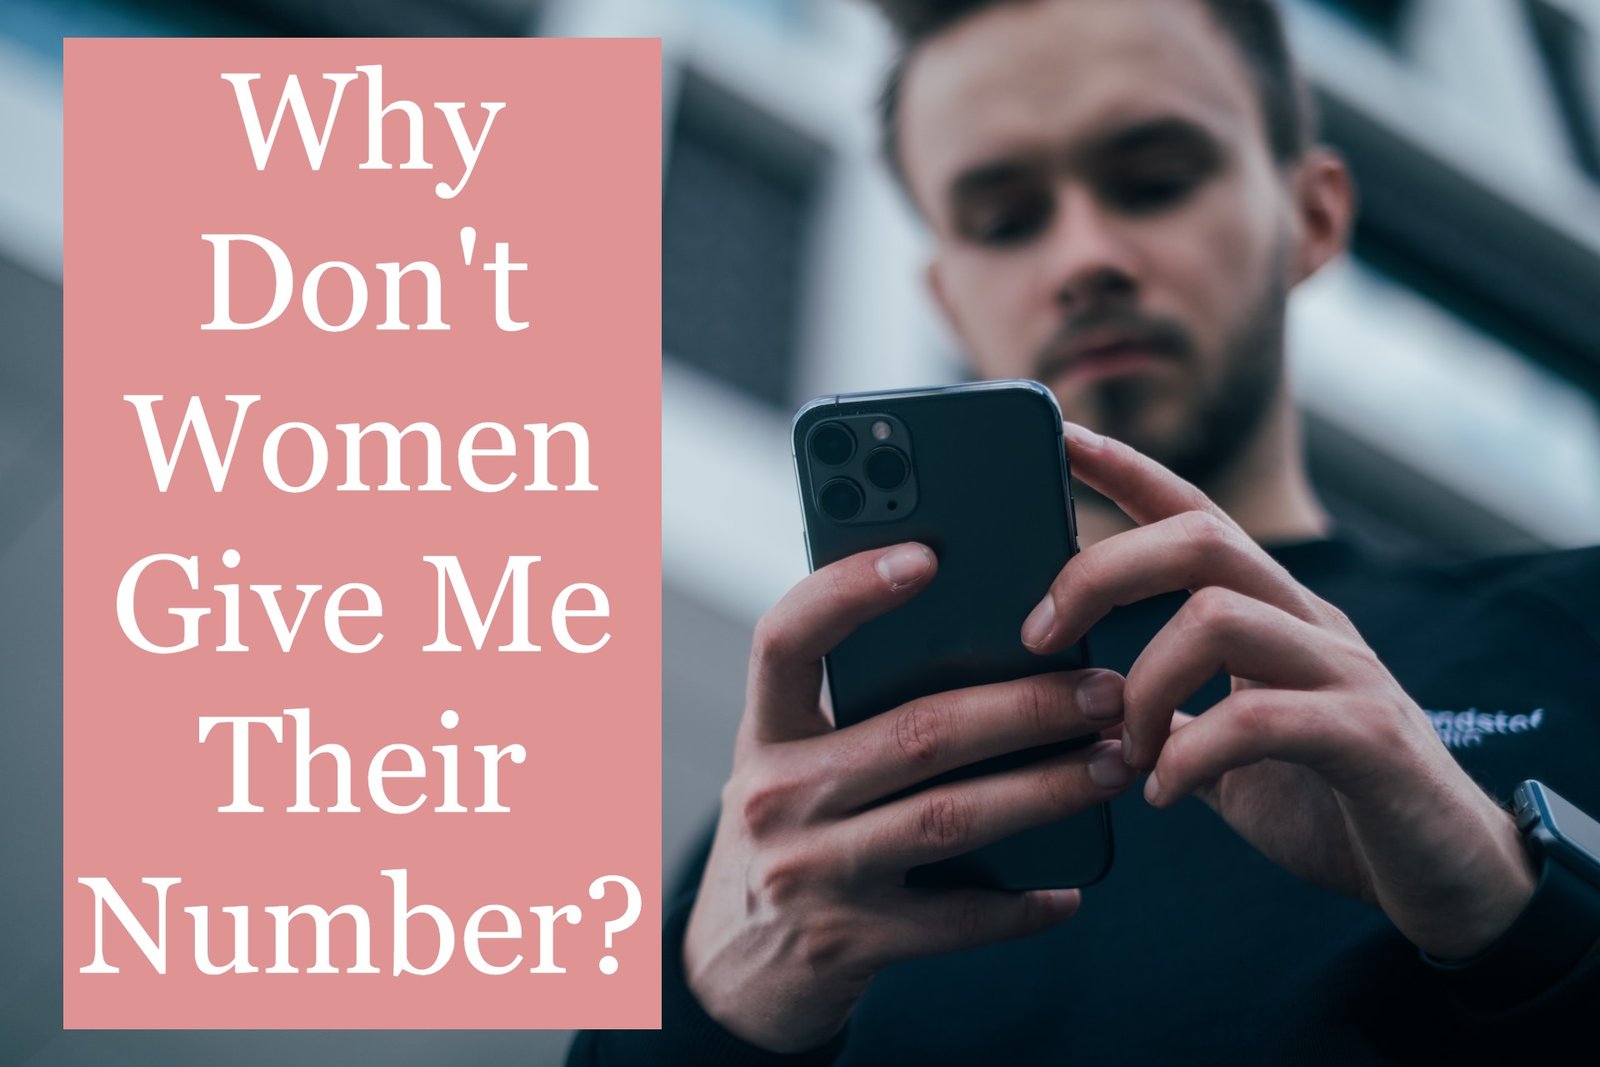 Why Don't Women Give Me Their Number?